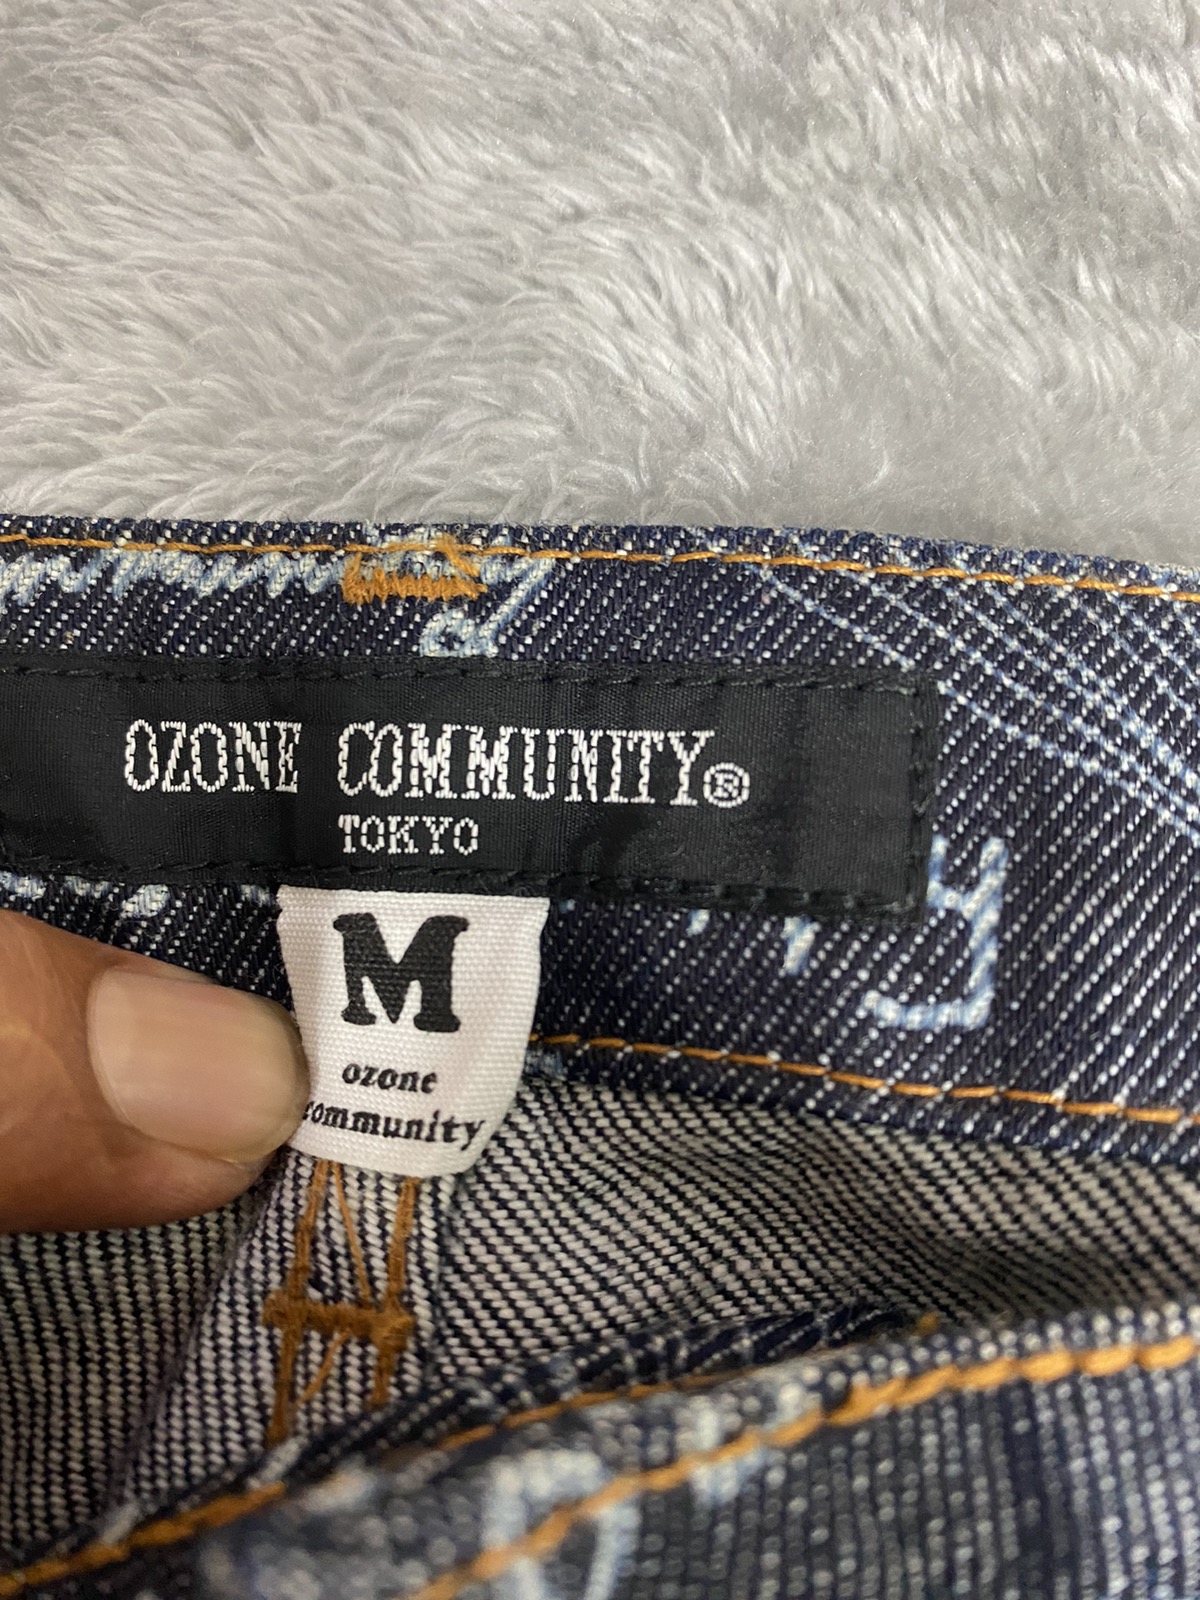 Ozone Community Design Hysteric Glamour Jeans. S0219